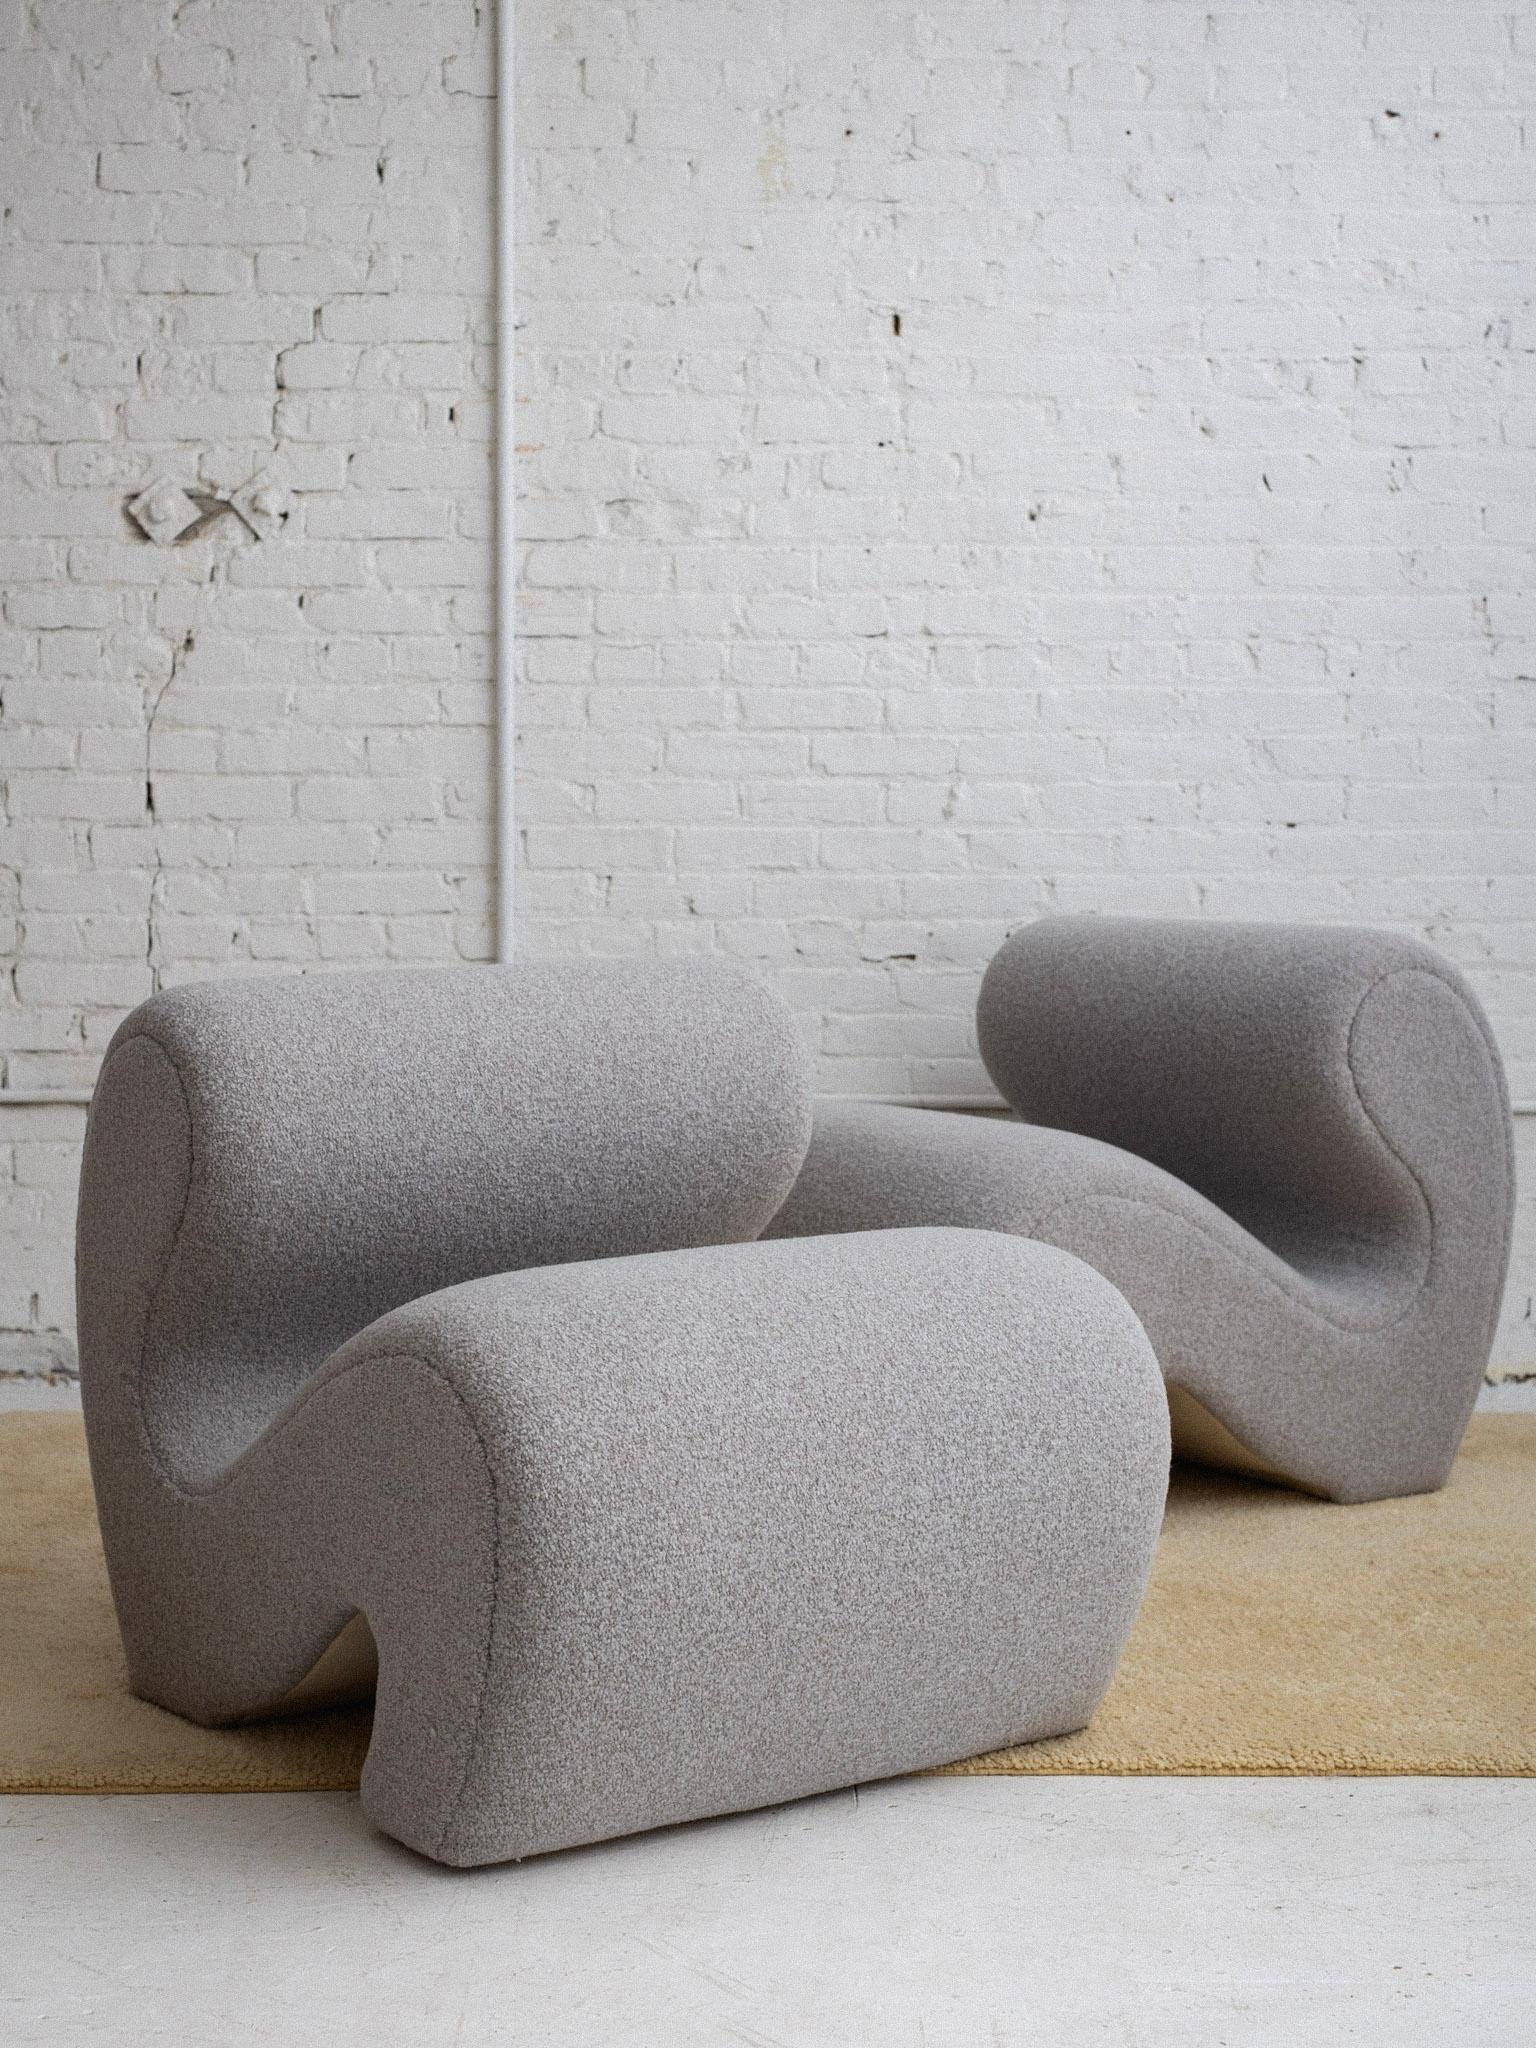 Inspired by a 1950s Italian design this custom occasional chair is made to order. The curving serpentine Silhouette is a bold graphic statement. It may be used as a chair or in tandem with additional pieces to create a modular seating arrangement.